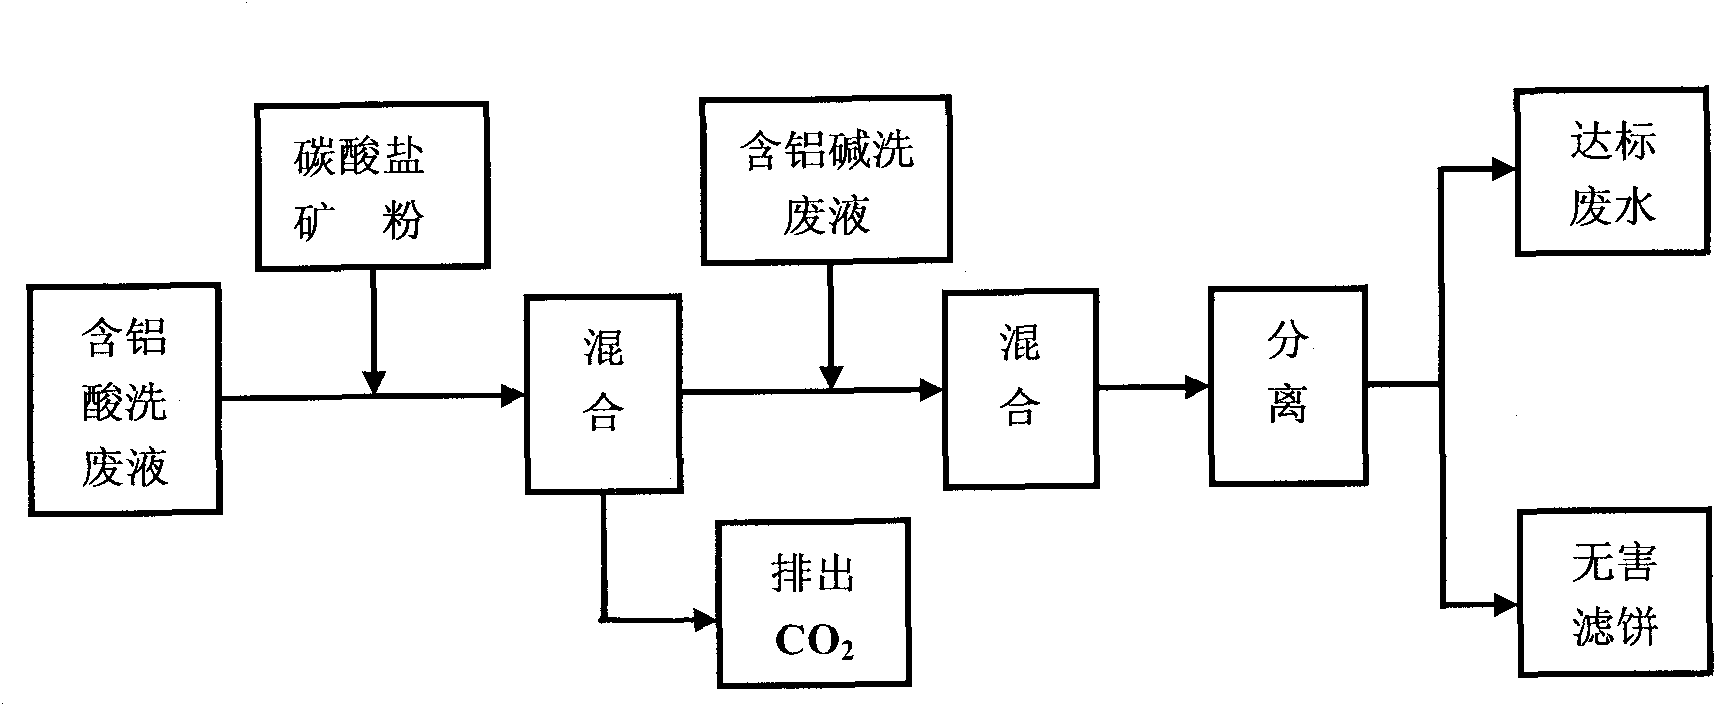 Process for treating aluminum substrate acid cleaning and alkaline cleaning waste liquid